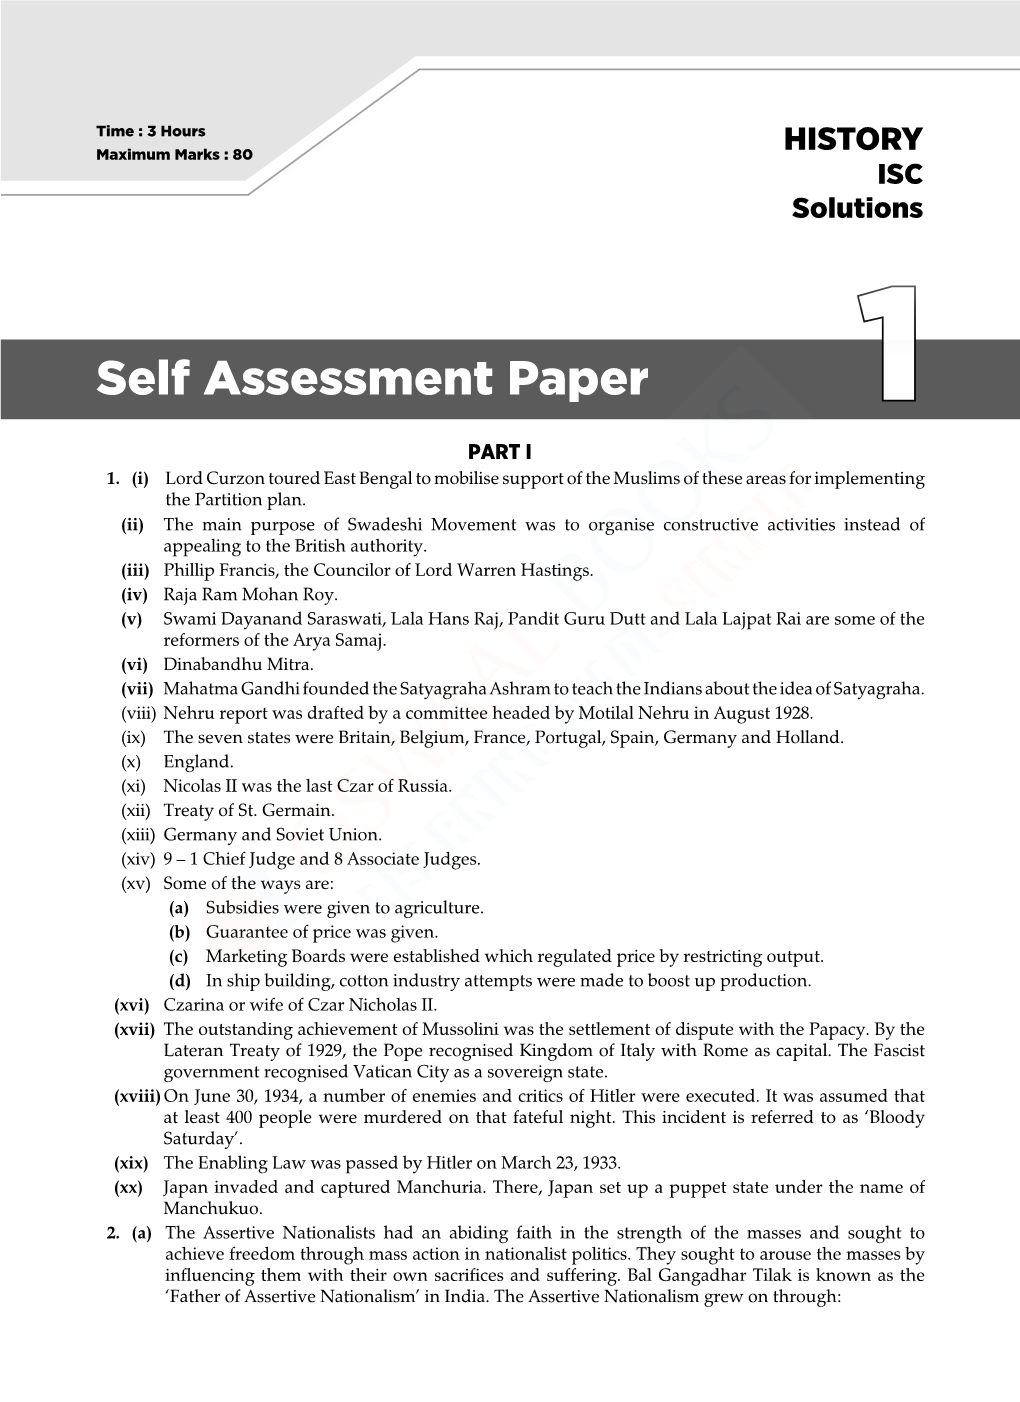 Oswaal ISC 11Th History Self Assessment Paper